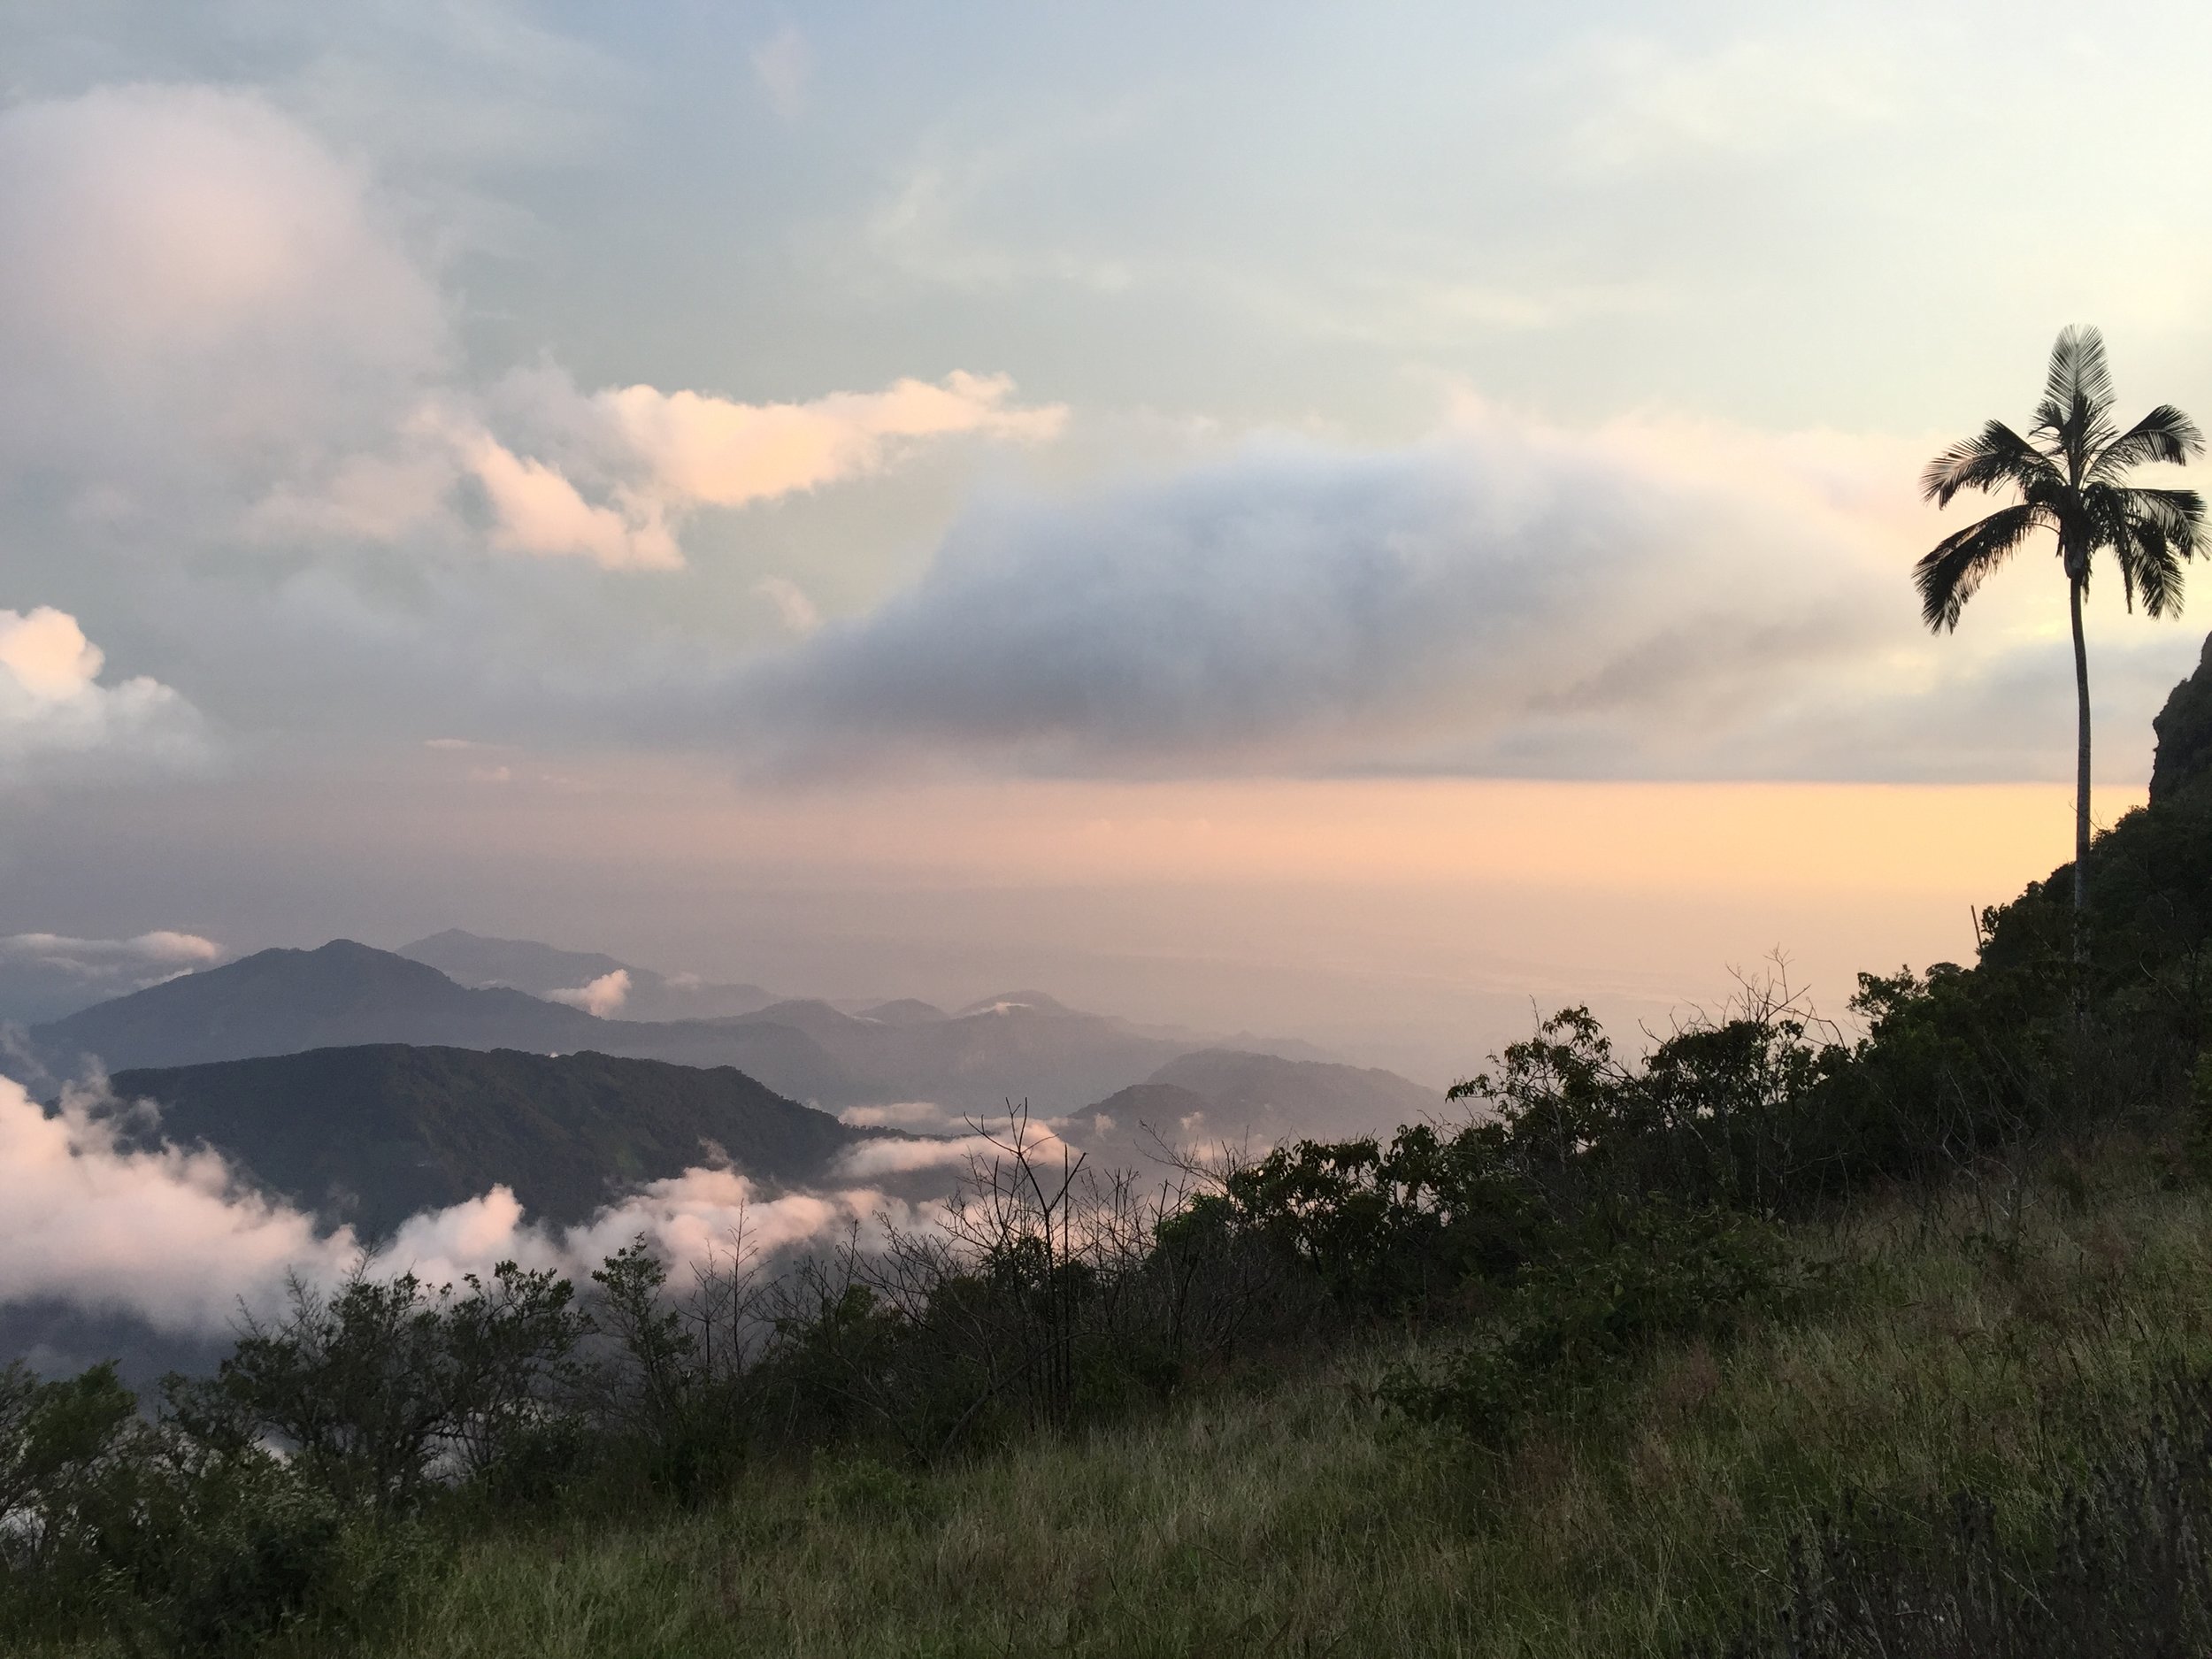 CERRO KENNEDY, COLOMBIA – JULY 28TH, 2017: The view from the summit of Cerro Kennedy, 7000 feet above the town of Minca. Clouds stream down from the lower peaks to the sea, less than 41 miles away.